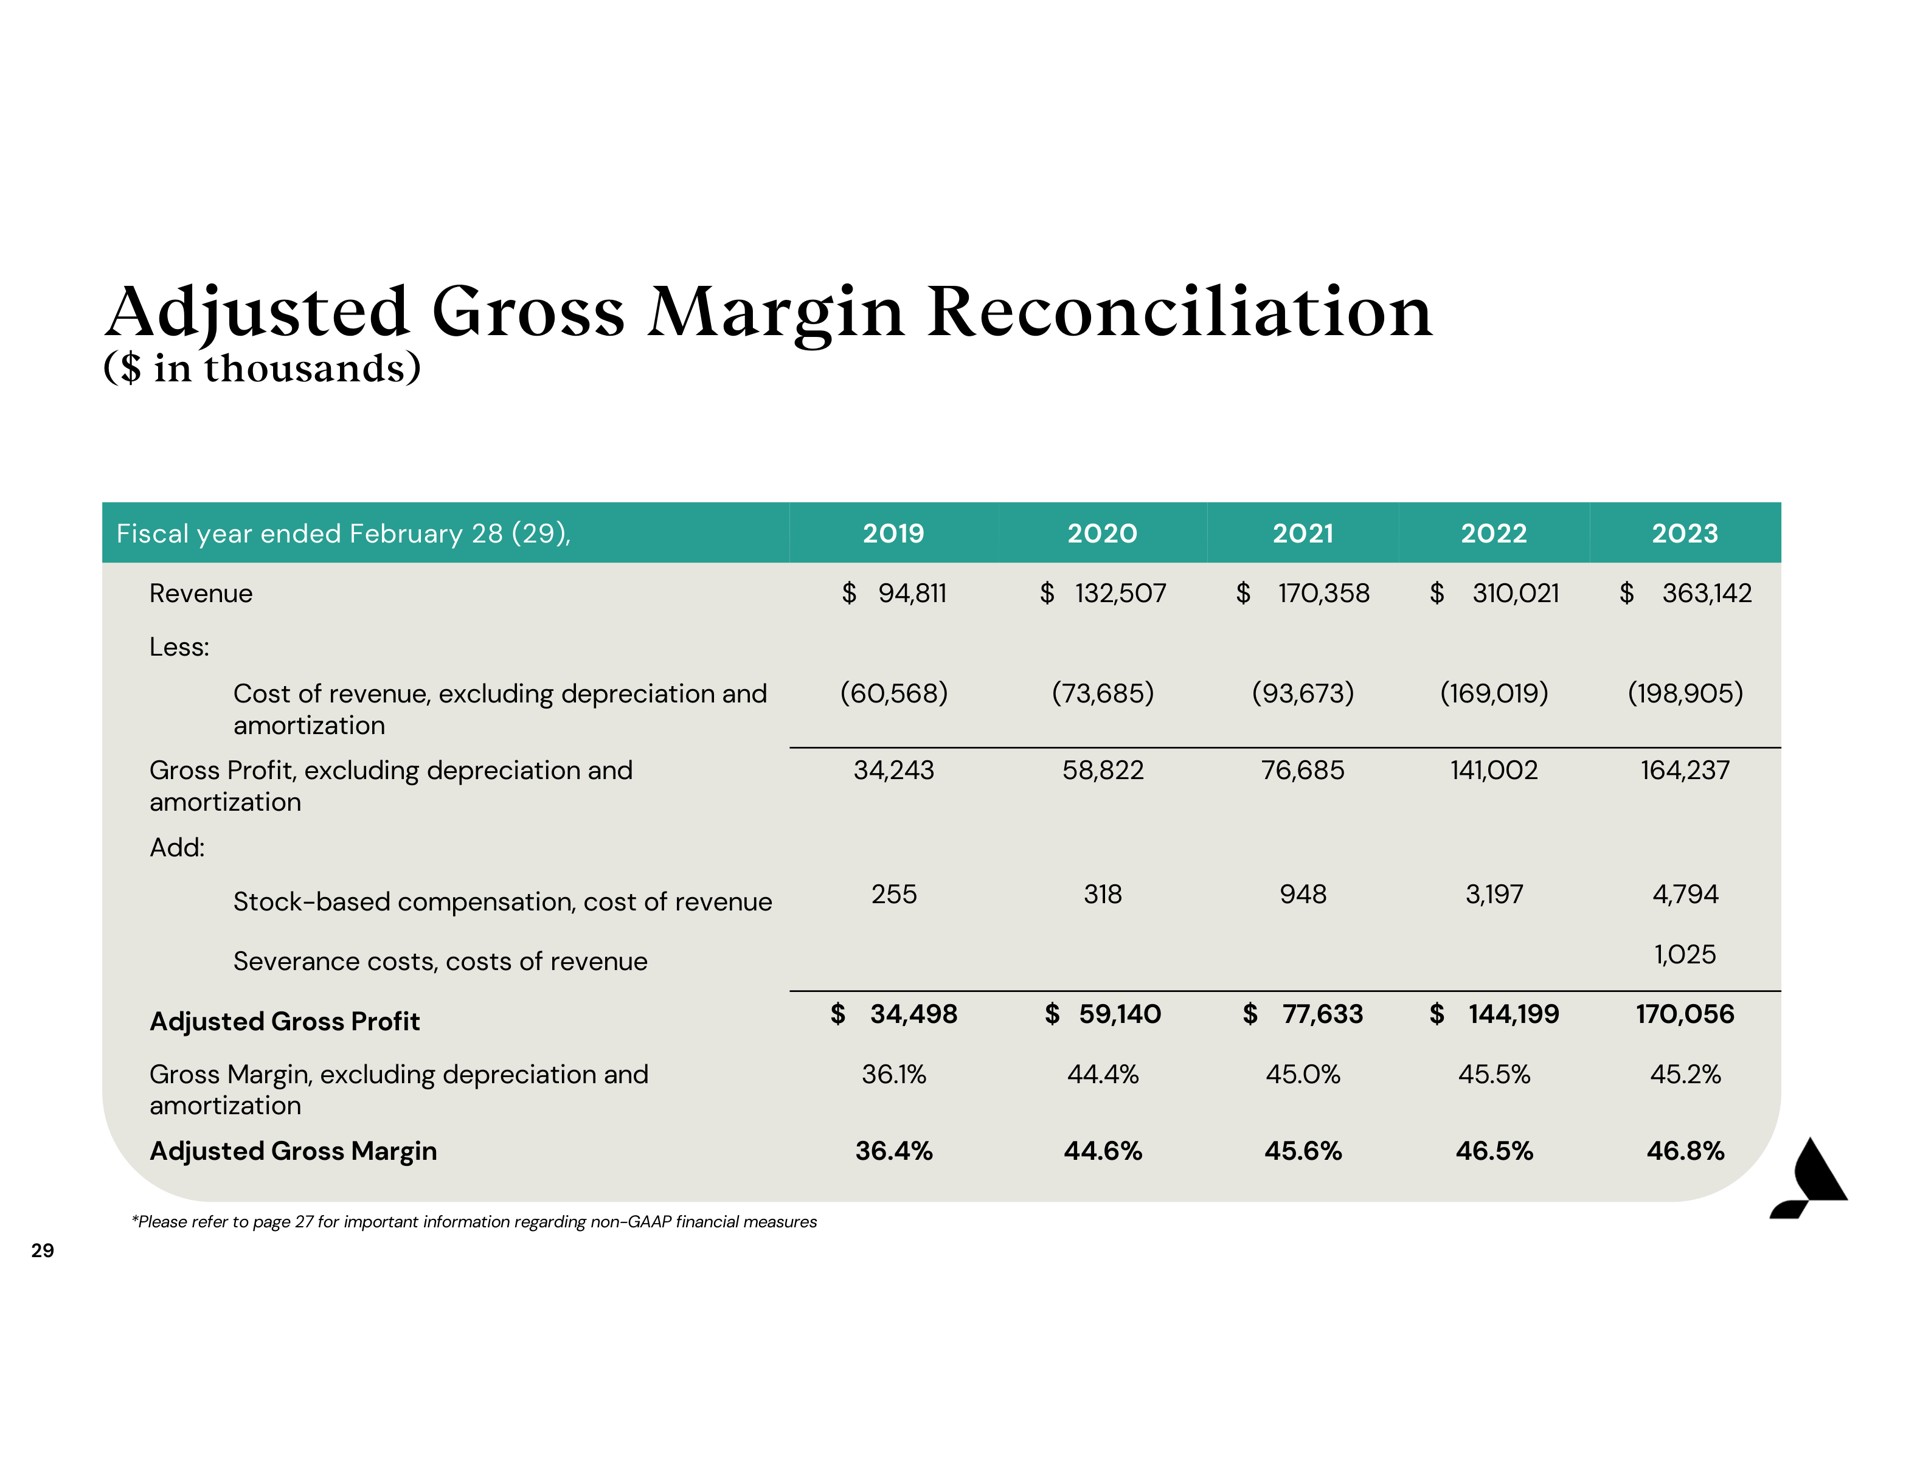 adjusted gross margin reconciliation | Accolade